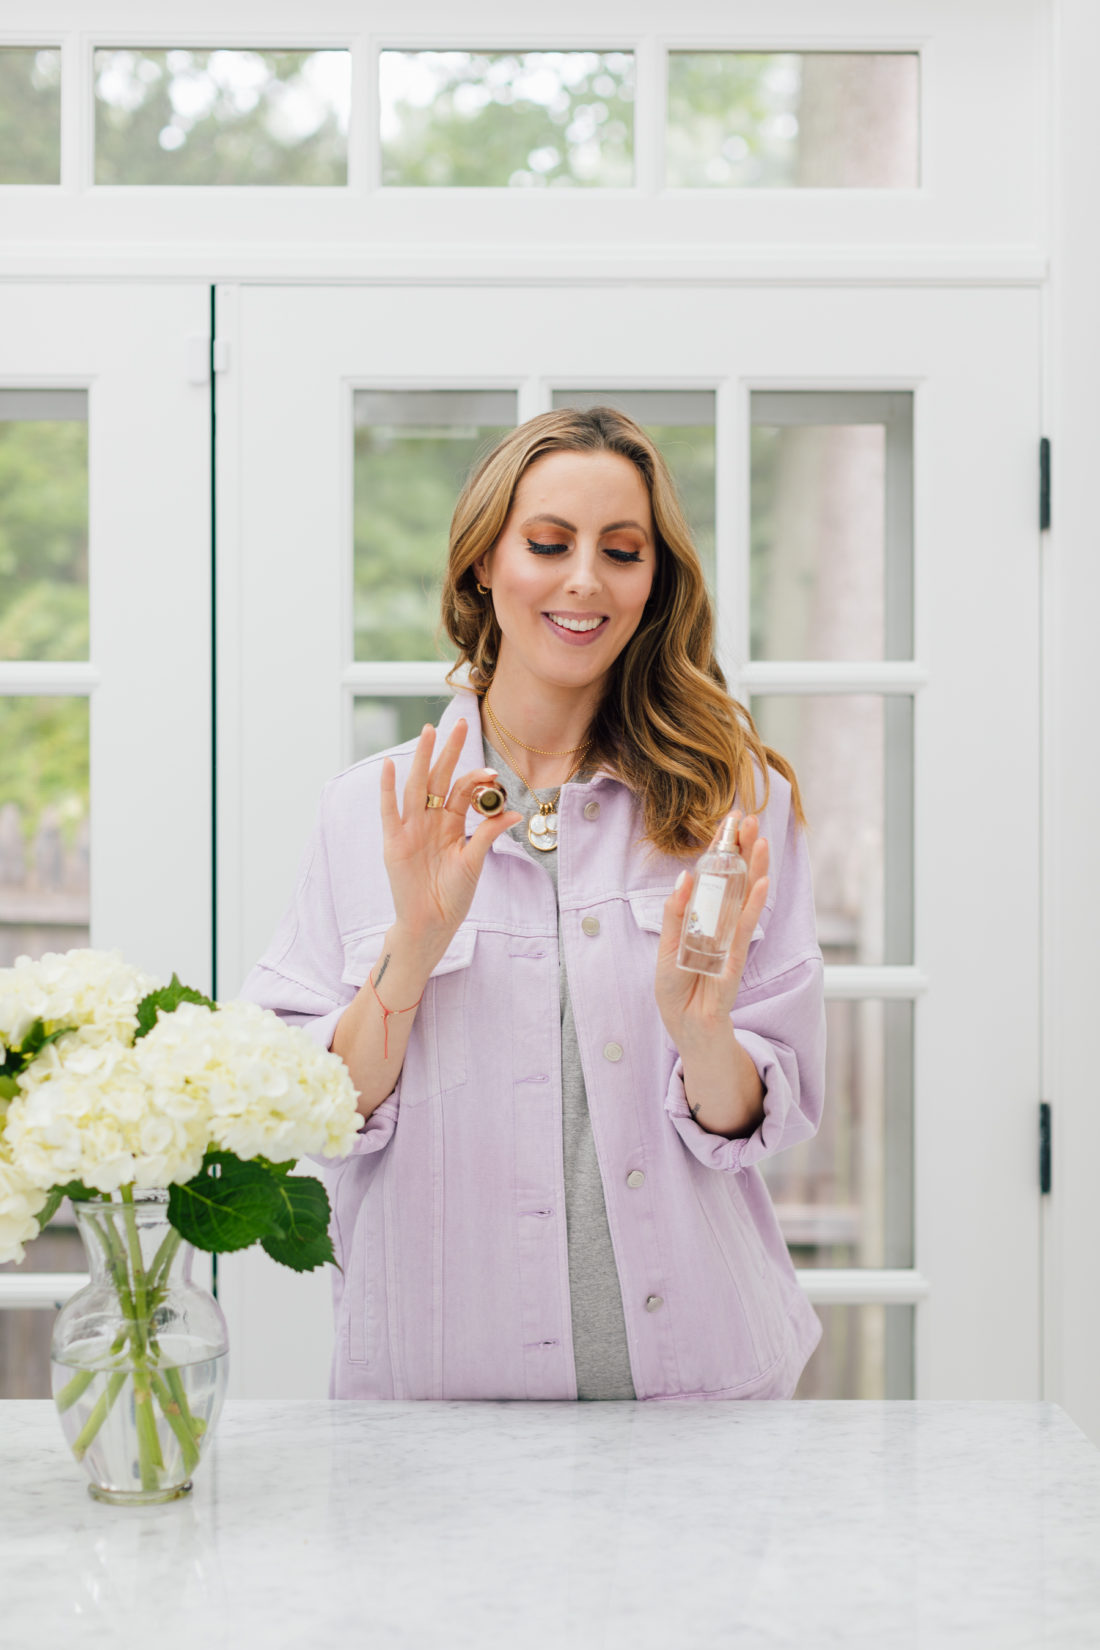 Eva Amurri Martino shares her September 2019 Obsessions which includes this Goutal “Petite Cherie” Perfume